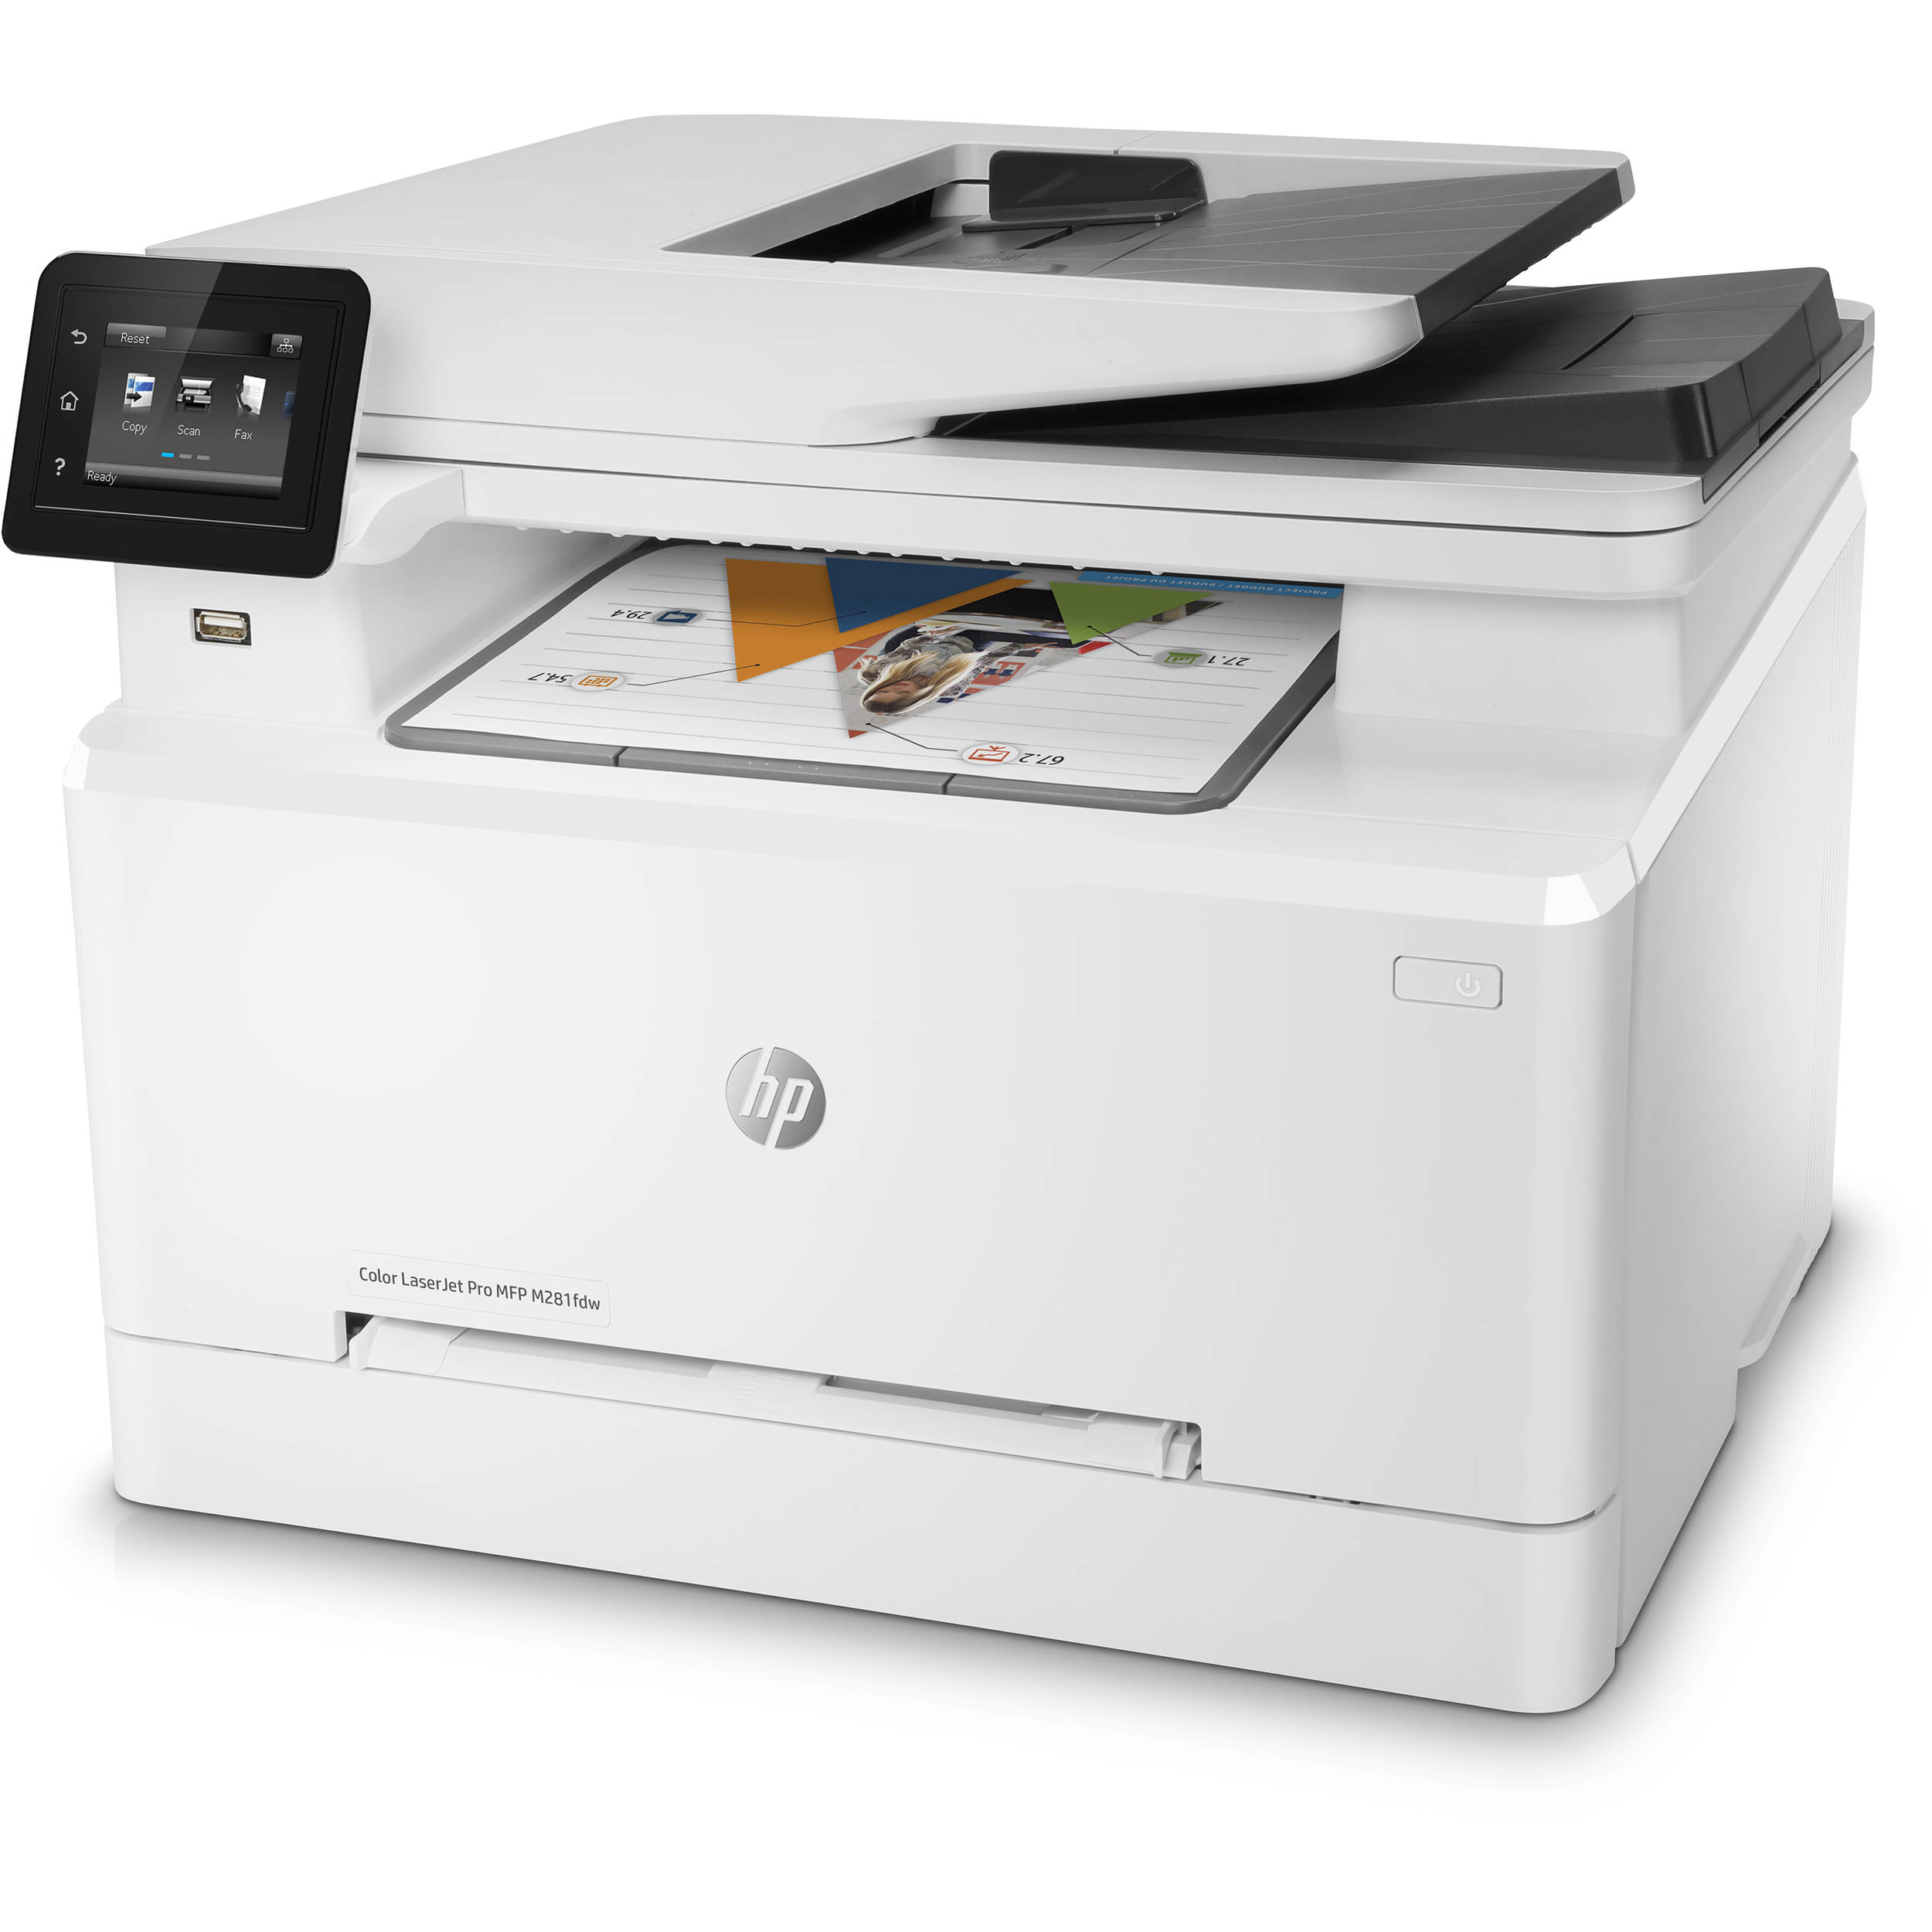 How To Print Checks On Hp Color Laserjet Pro Mfp M281fdw In Quicken For Mac